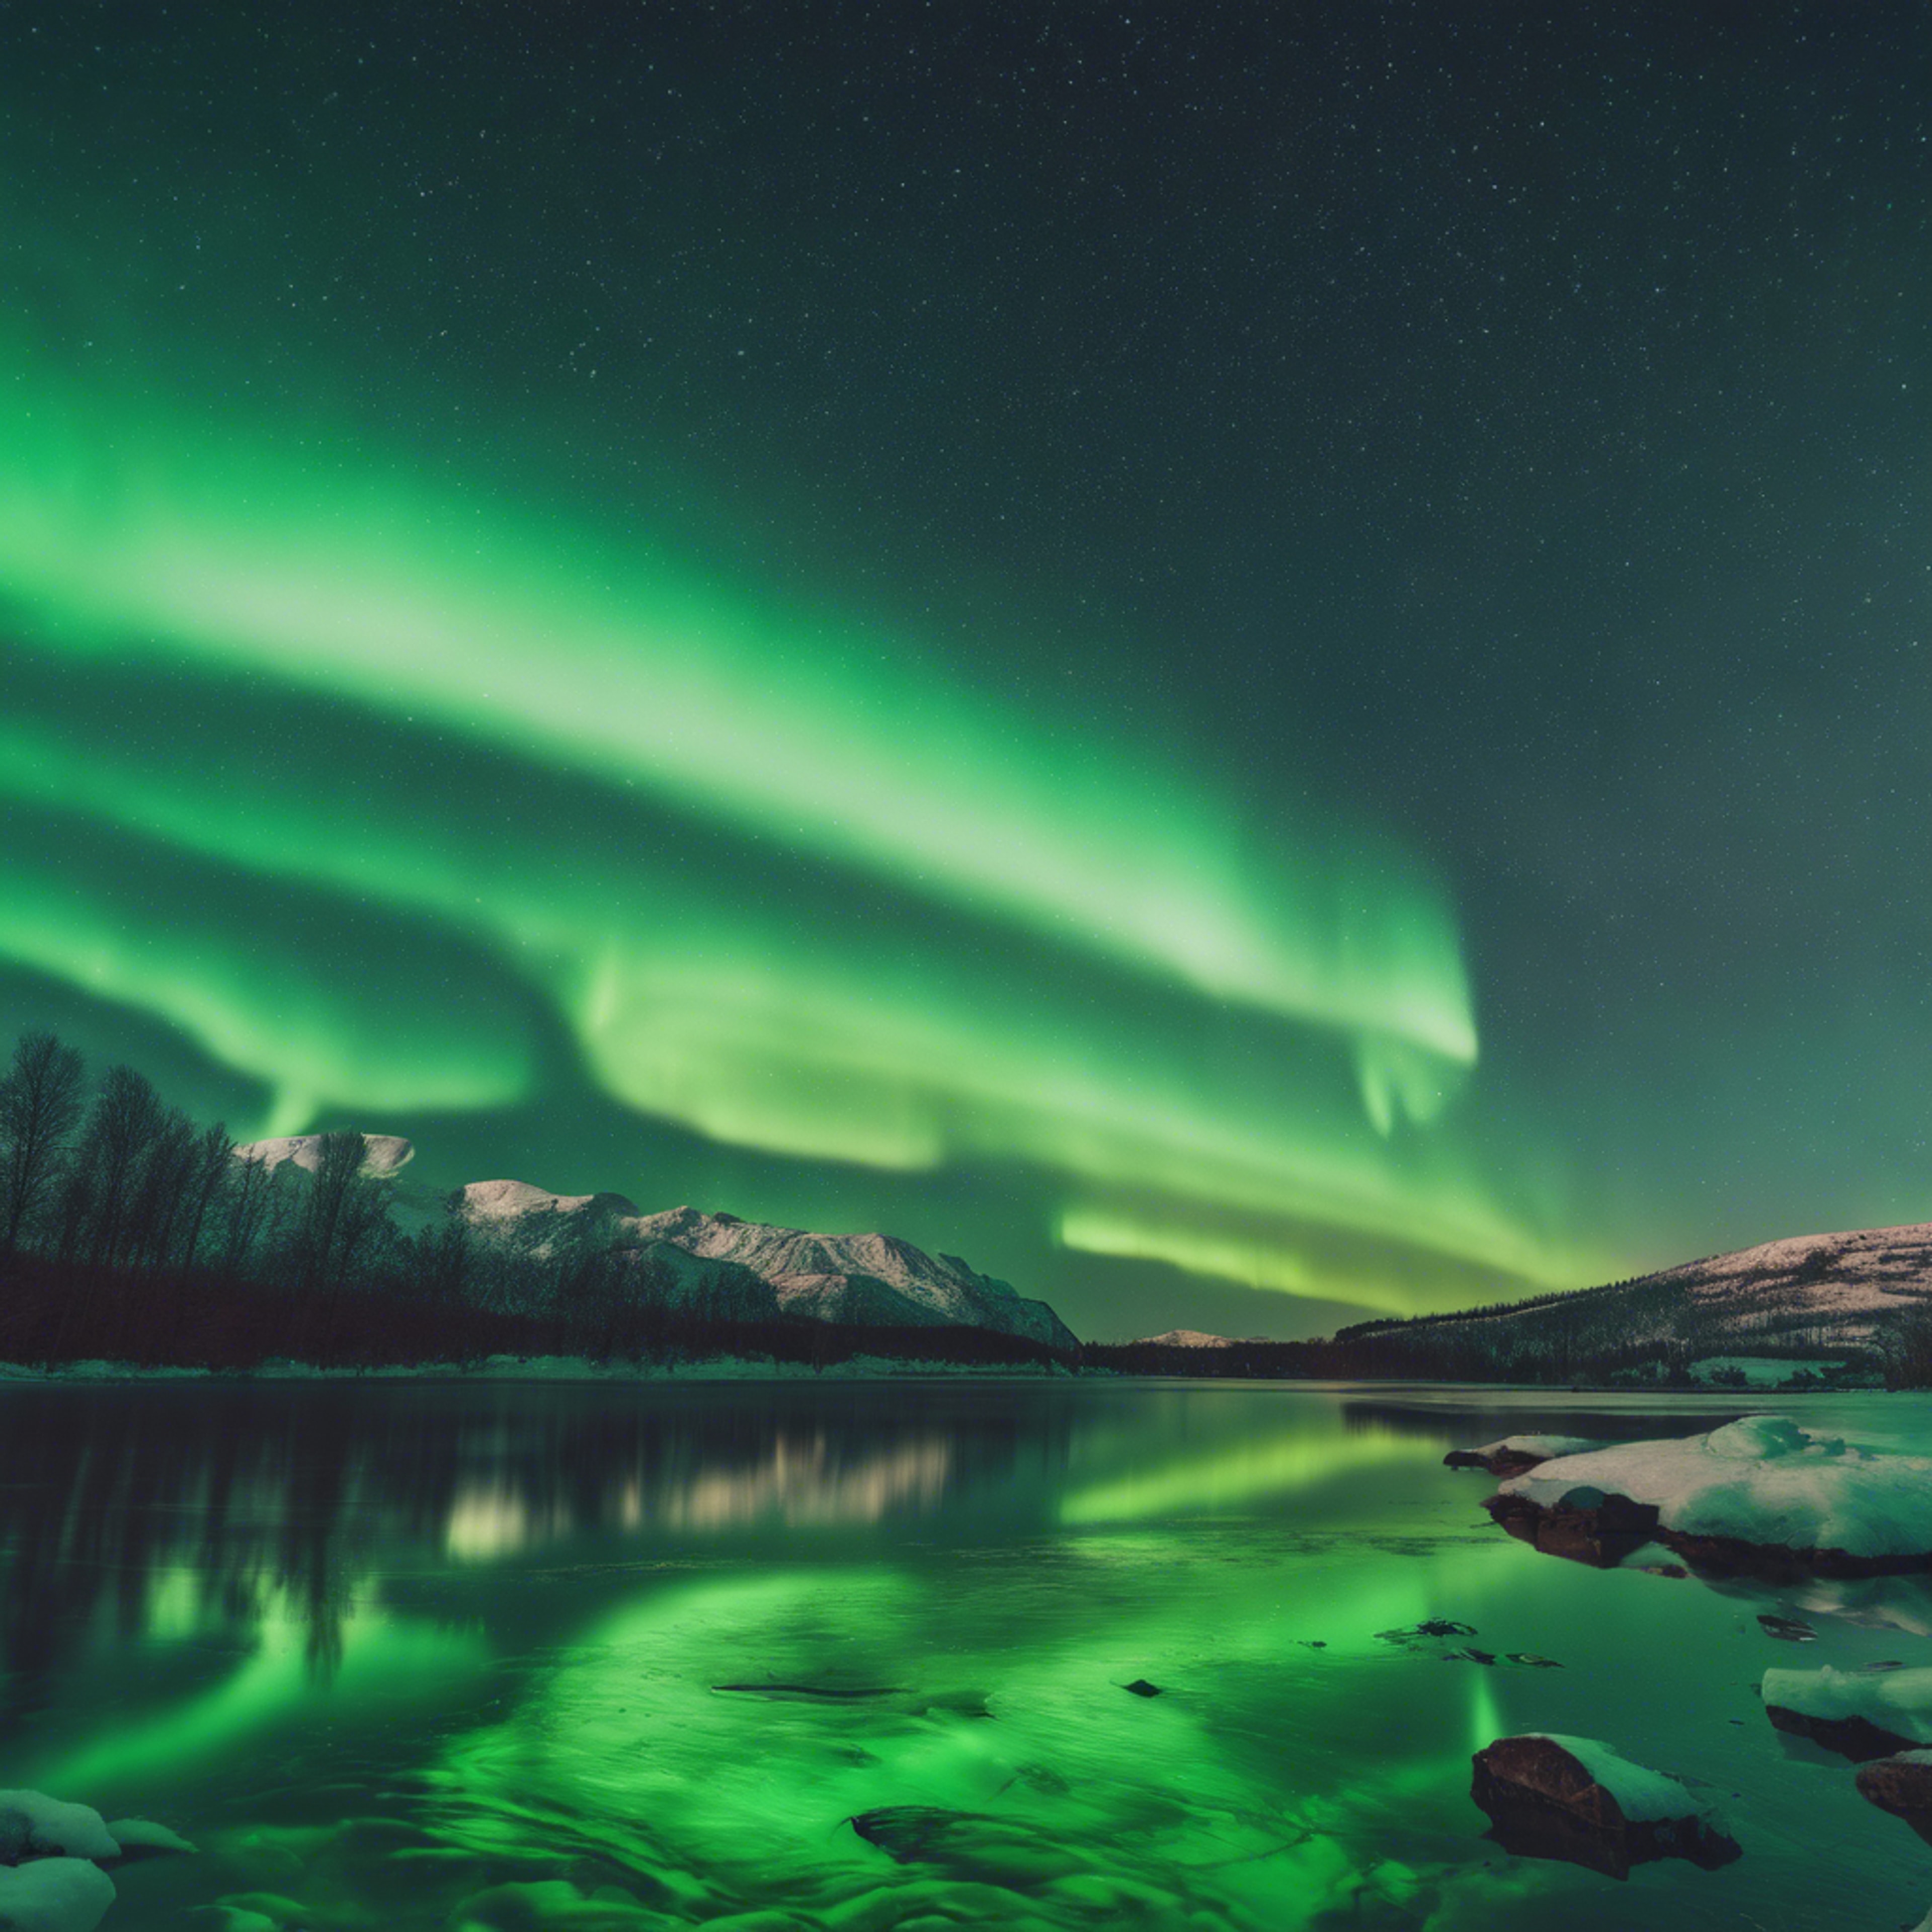 Cool green aurora borealis in the night sky. Behang[6739bc2aef4a46929ef0]